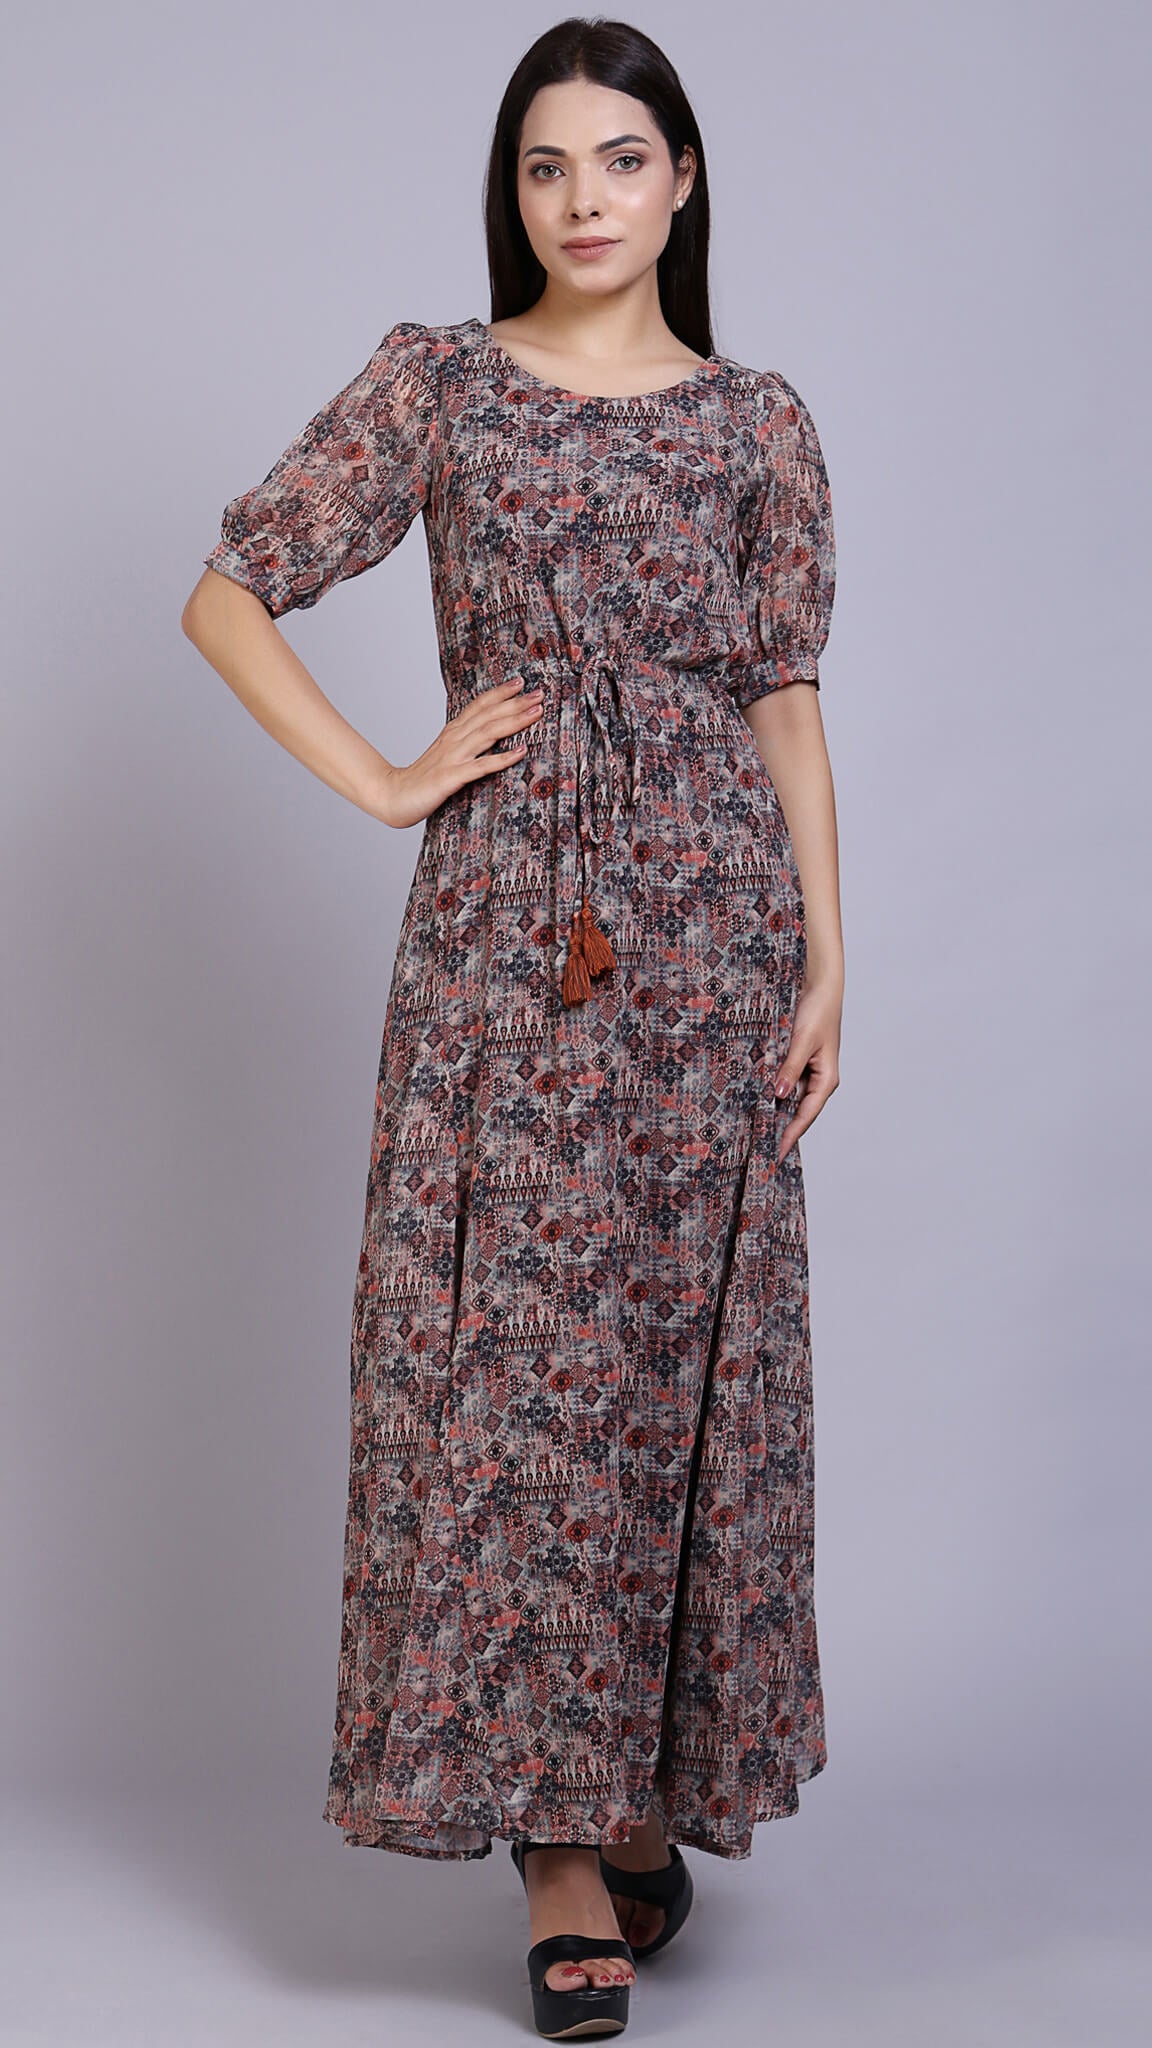 Robes And Big Stream|women's African Print Maxi Dress - Cotton Wax Batik  With Lining